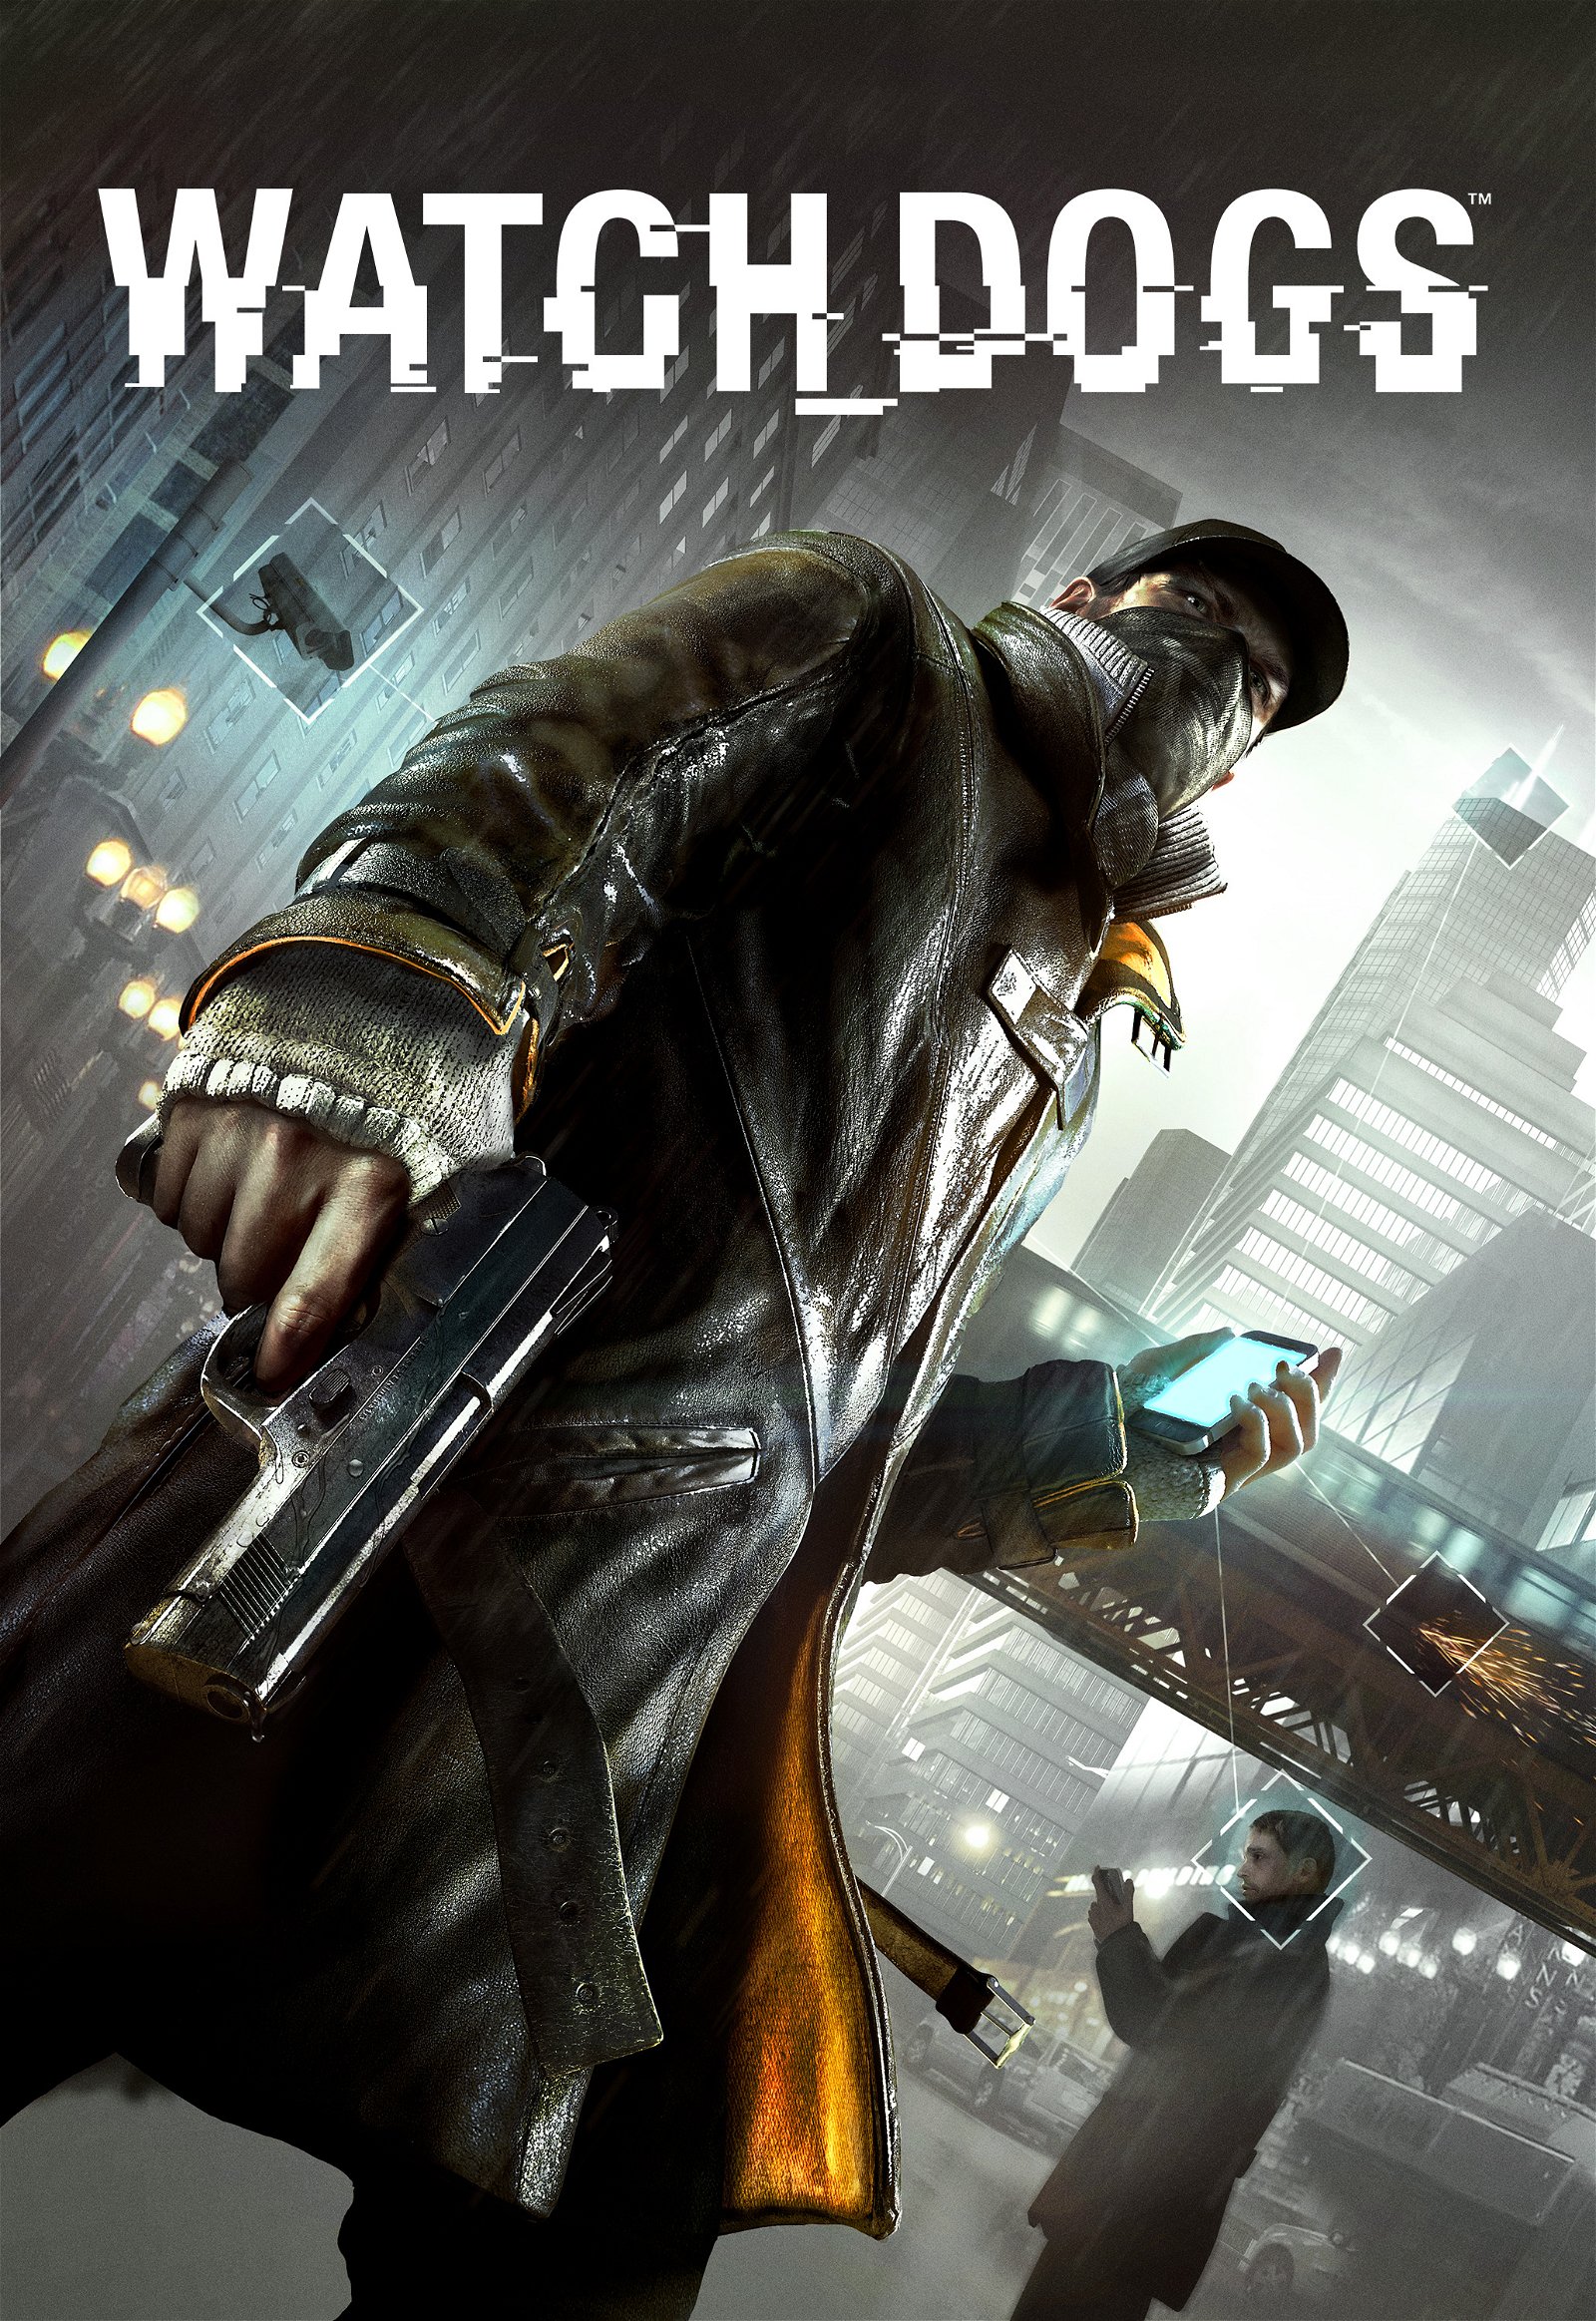 Image of Watch_Dogs